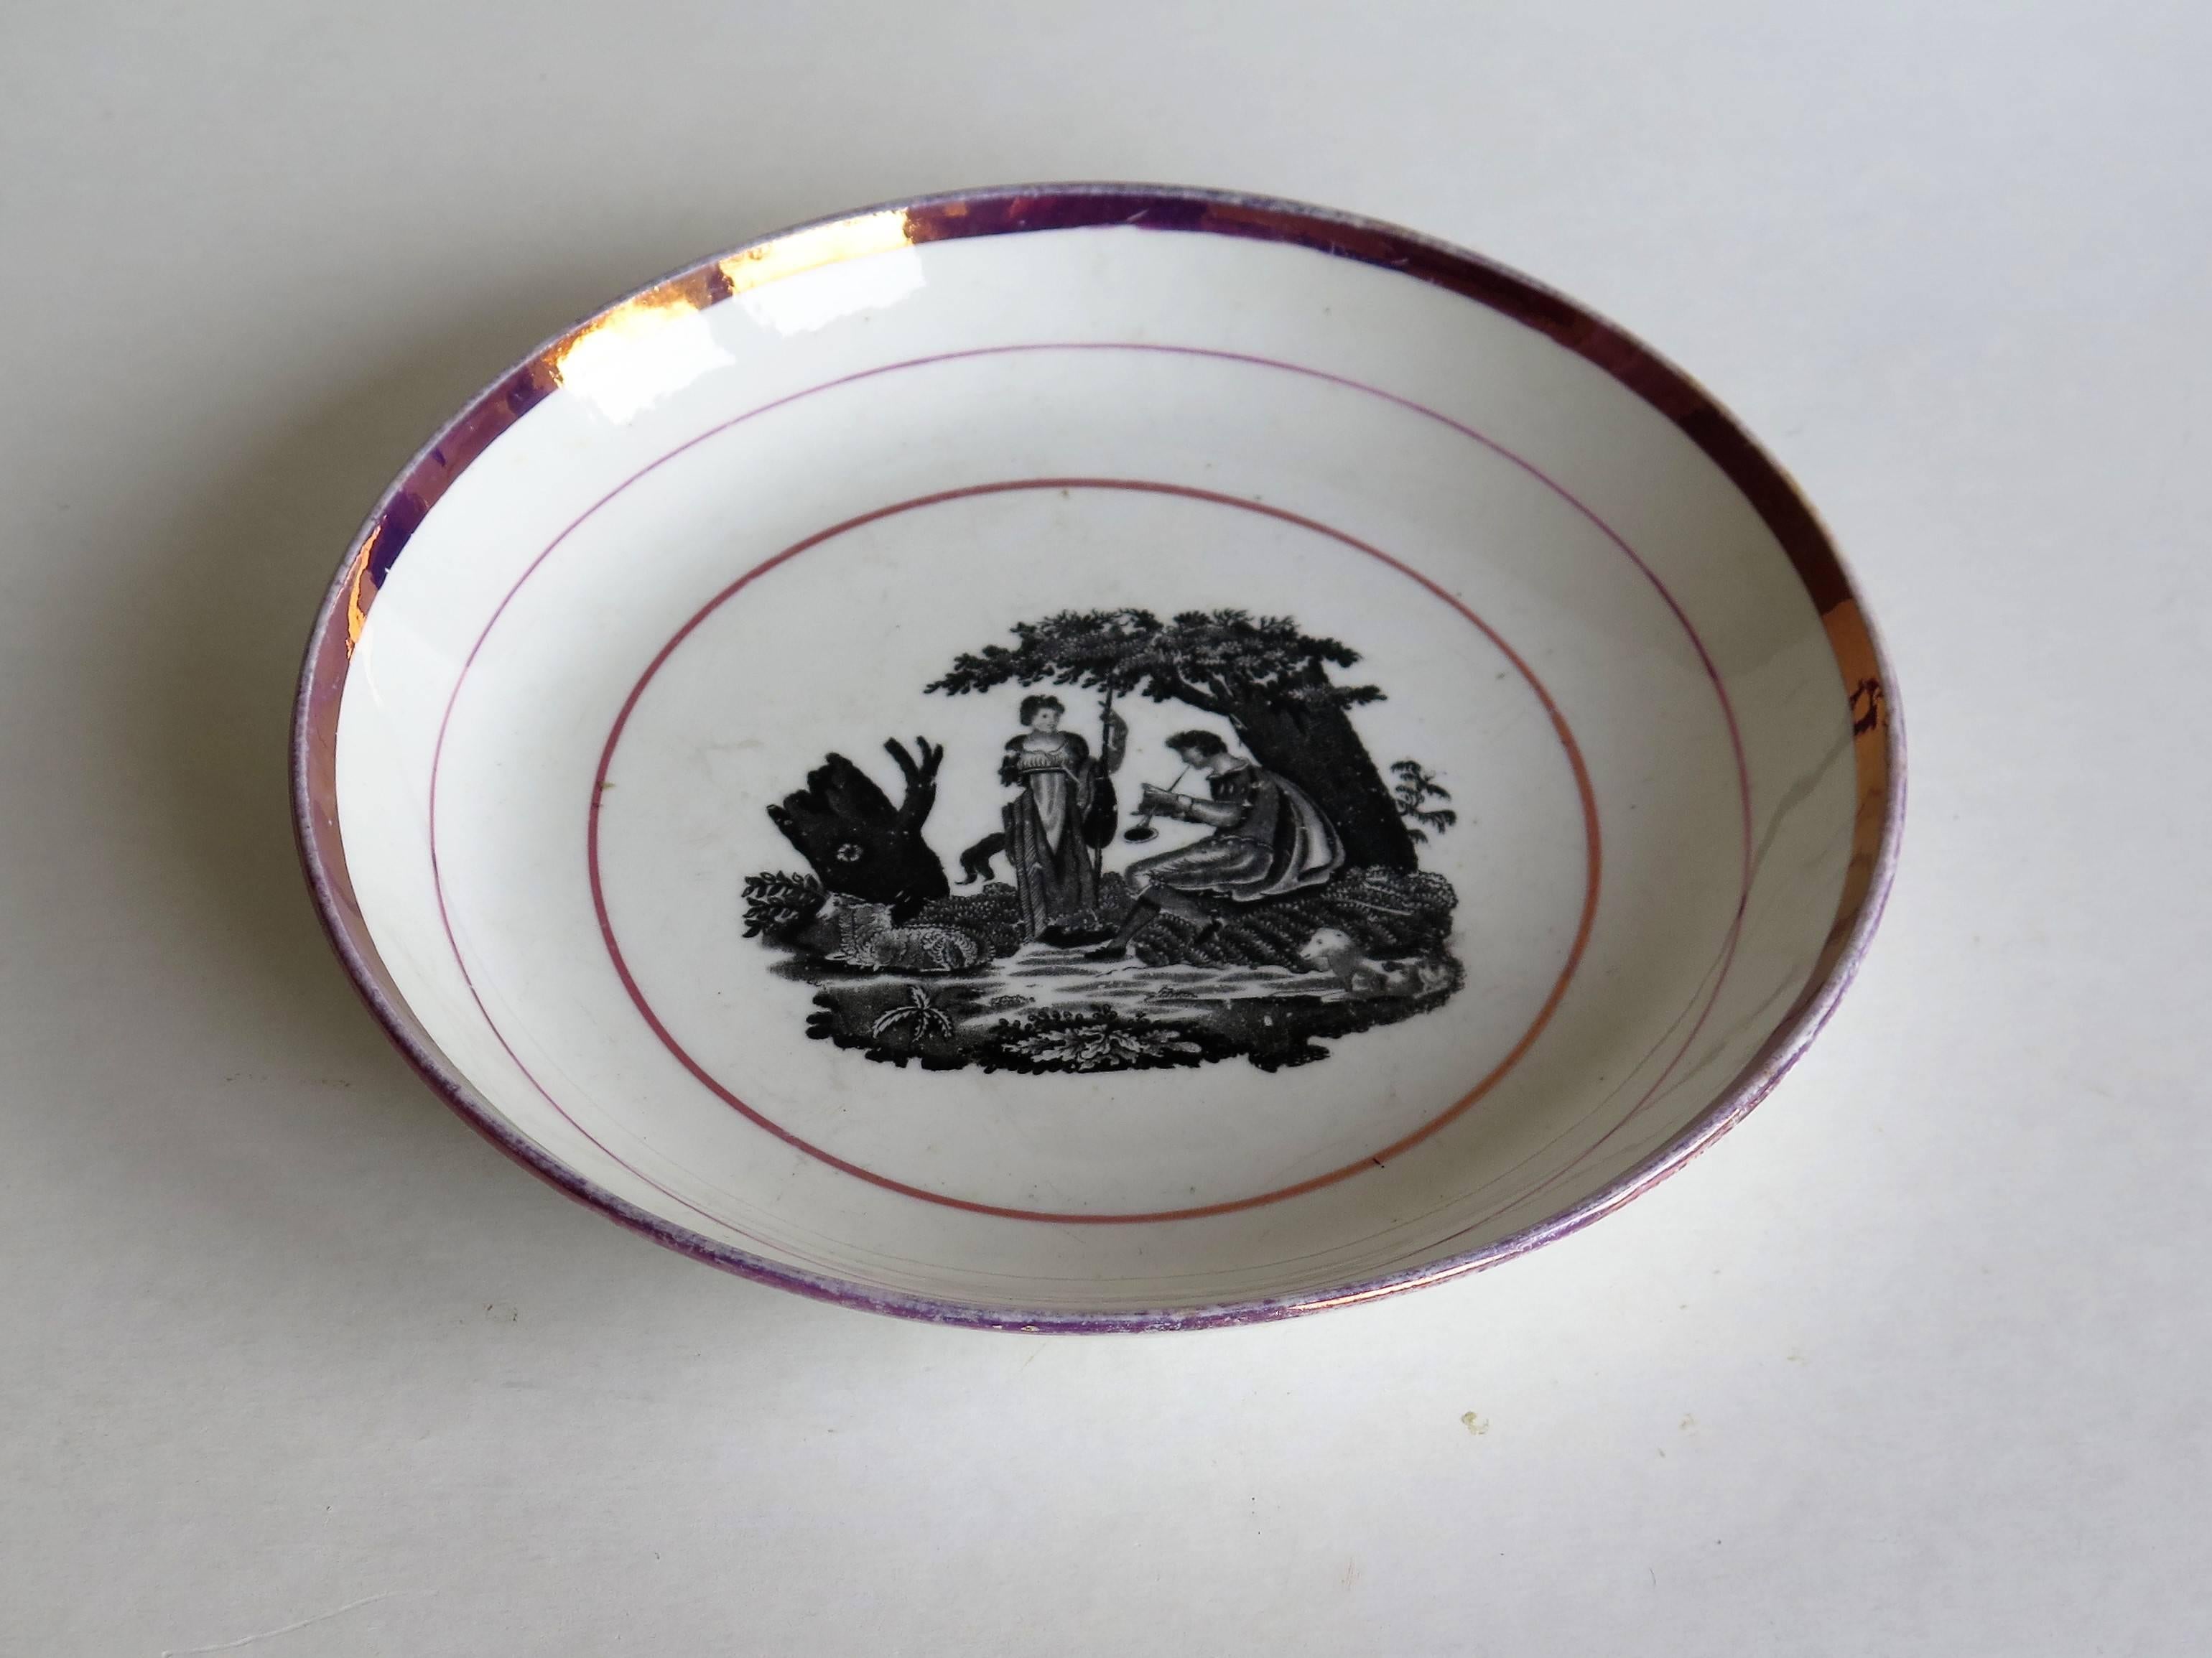 Glazed Early 19th Century Sunderland Porcelain Lustre Dish, Classical Printed Pattern